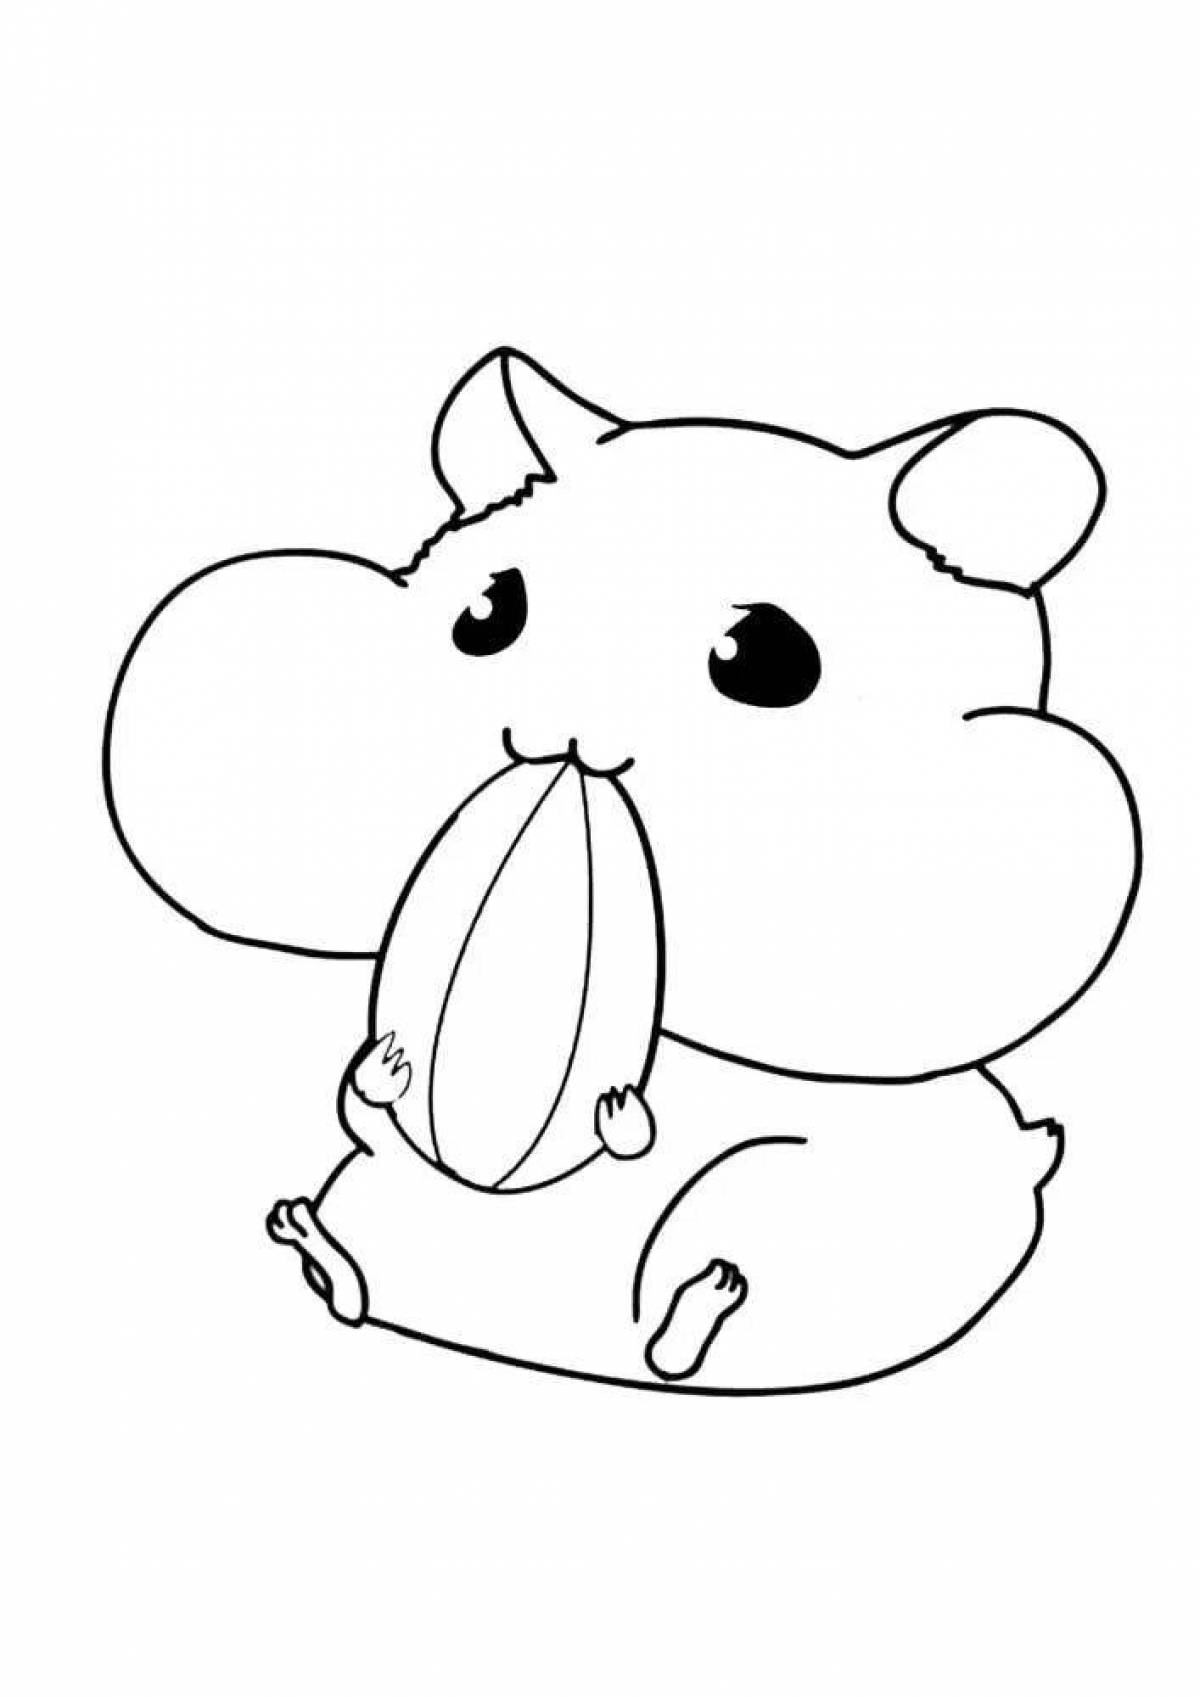 Precious hamster coloring pages